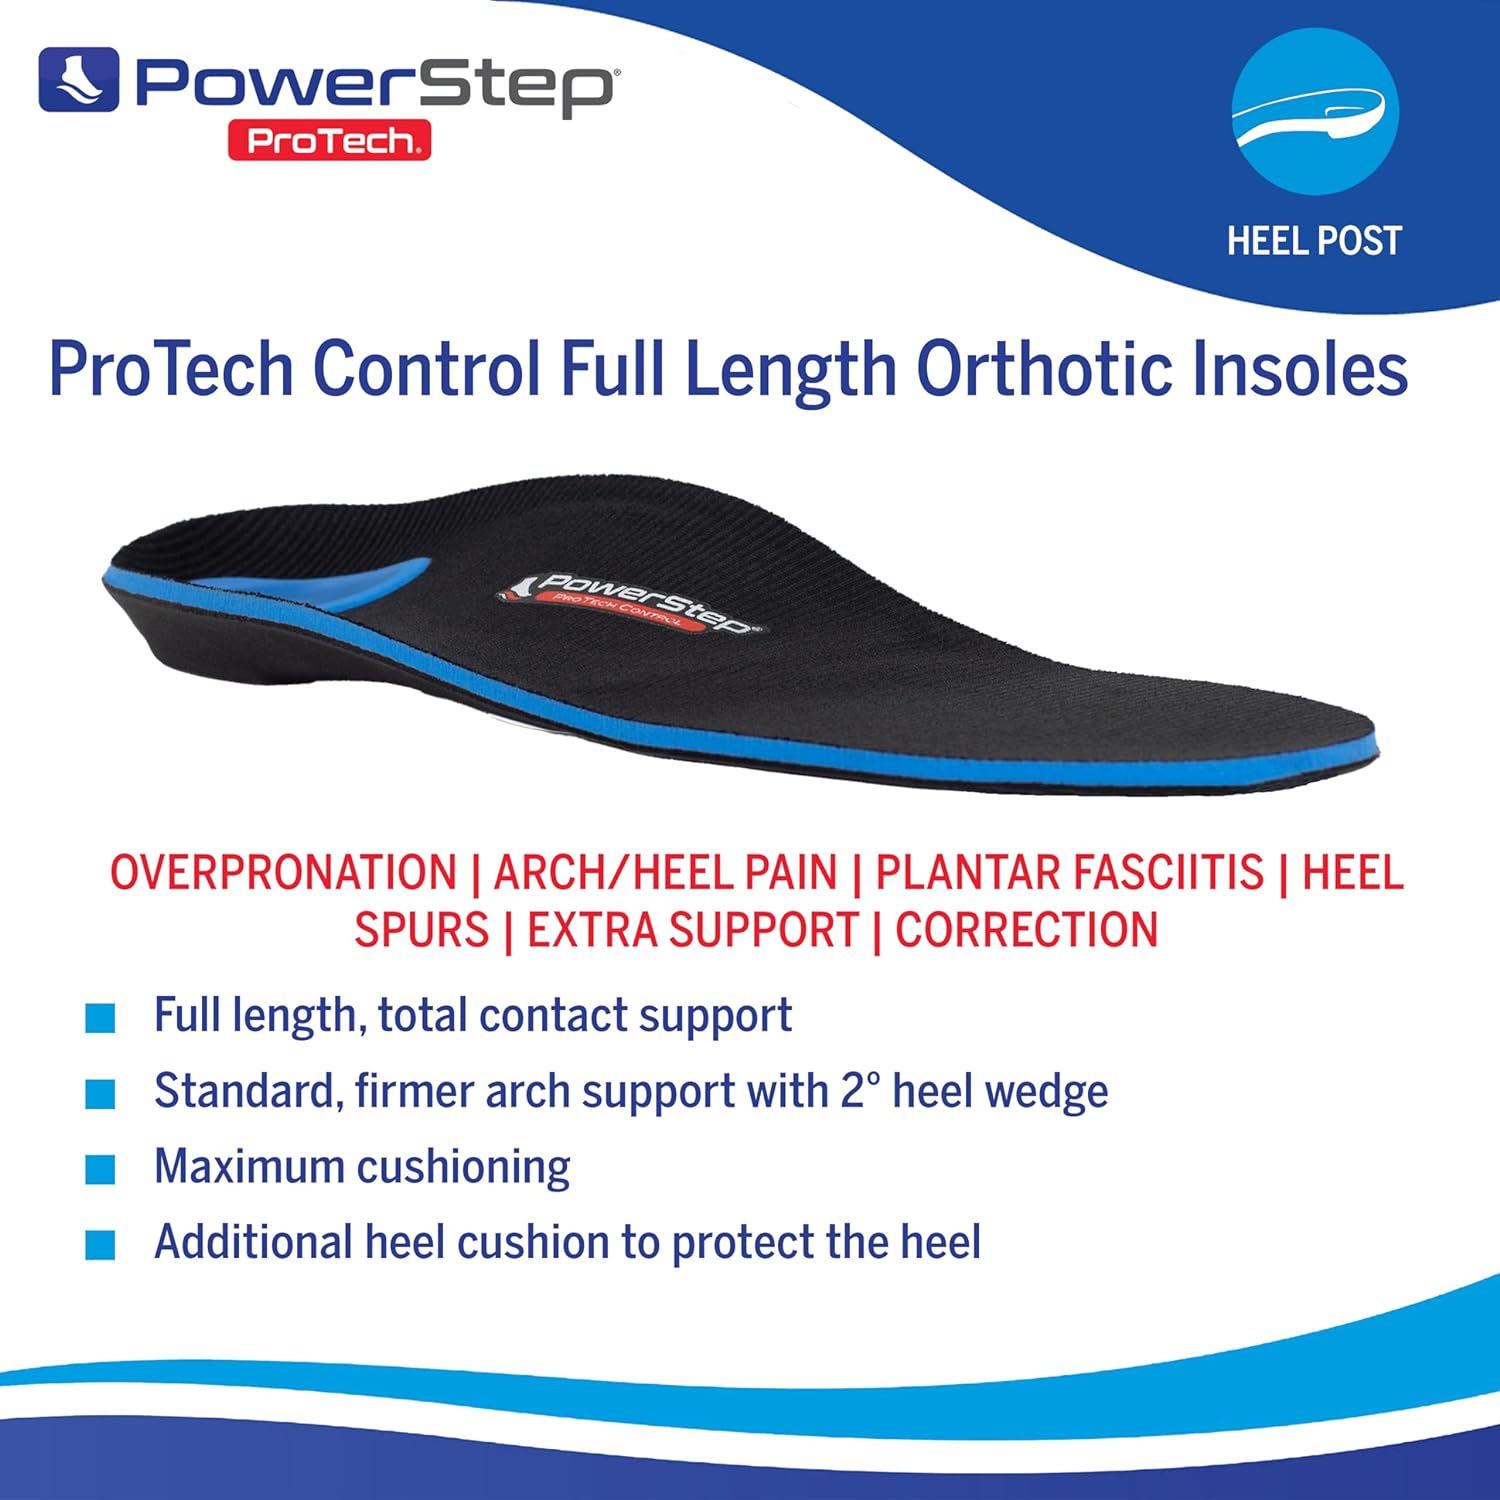 PowerStep ProTech Control Full Length Orthotic Insoles - Orthotics for Overpronation, Flat Feet and Heel Pain - Medical Grade Shoe Inserts with Maximum Cushioning for Arch Support (M 10-10.5 W 12)